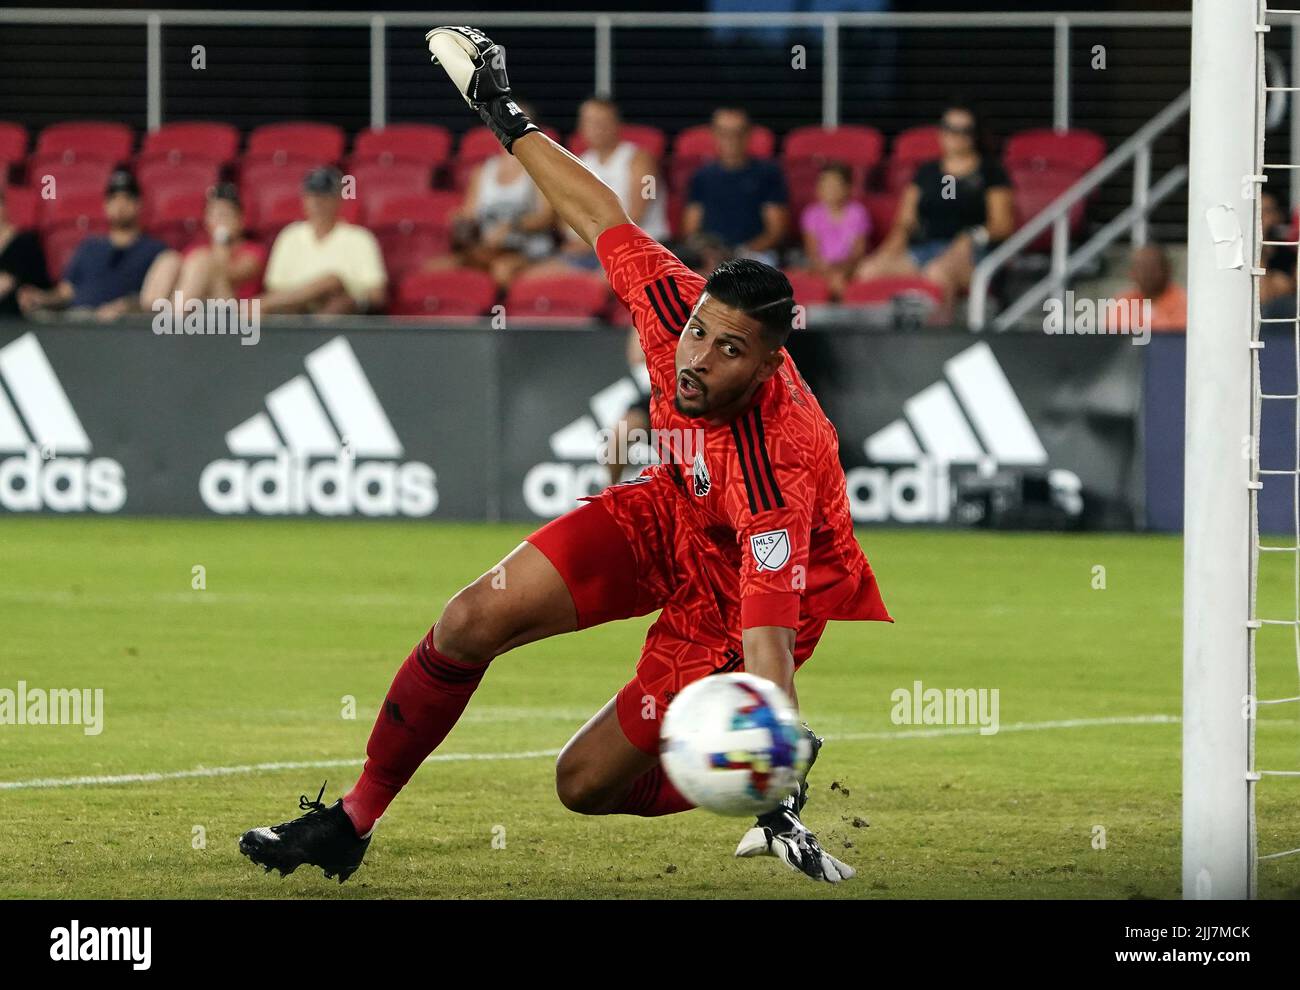 WASHINGTON, DC, USA - 23 JULY 2022: D.C. United goalkeeper Rafael Romo (1) pushes the ball wide during a MLS match between D.C United and C.F. Montreal, on July 23, 2022, at Audi Field, in Washington, DC. (Photo by Tony Quinn-Alamy Live News) Stock Photo